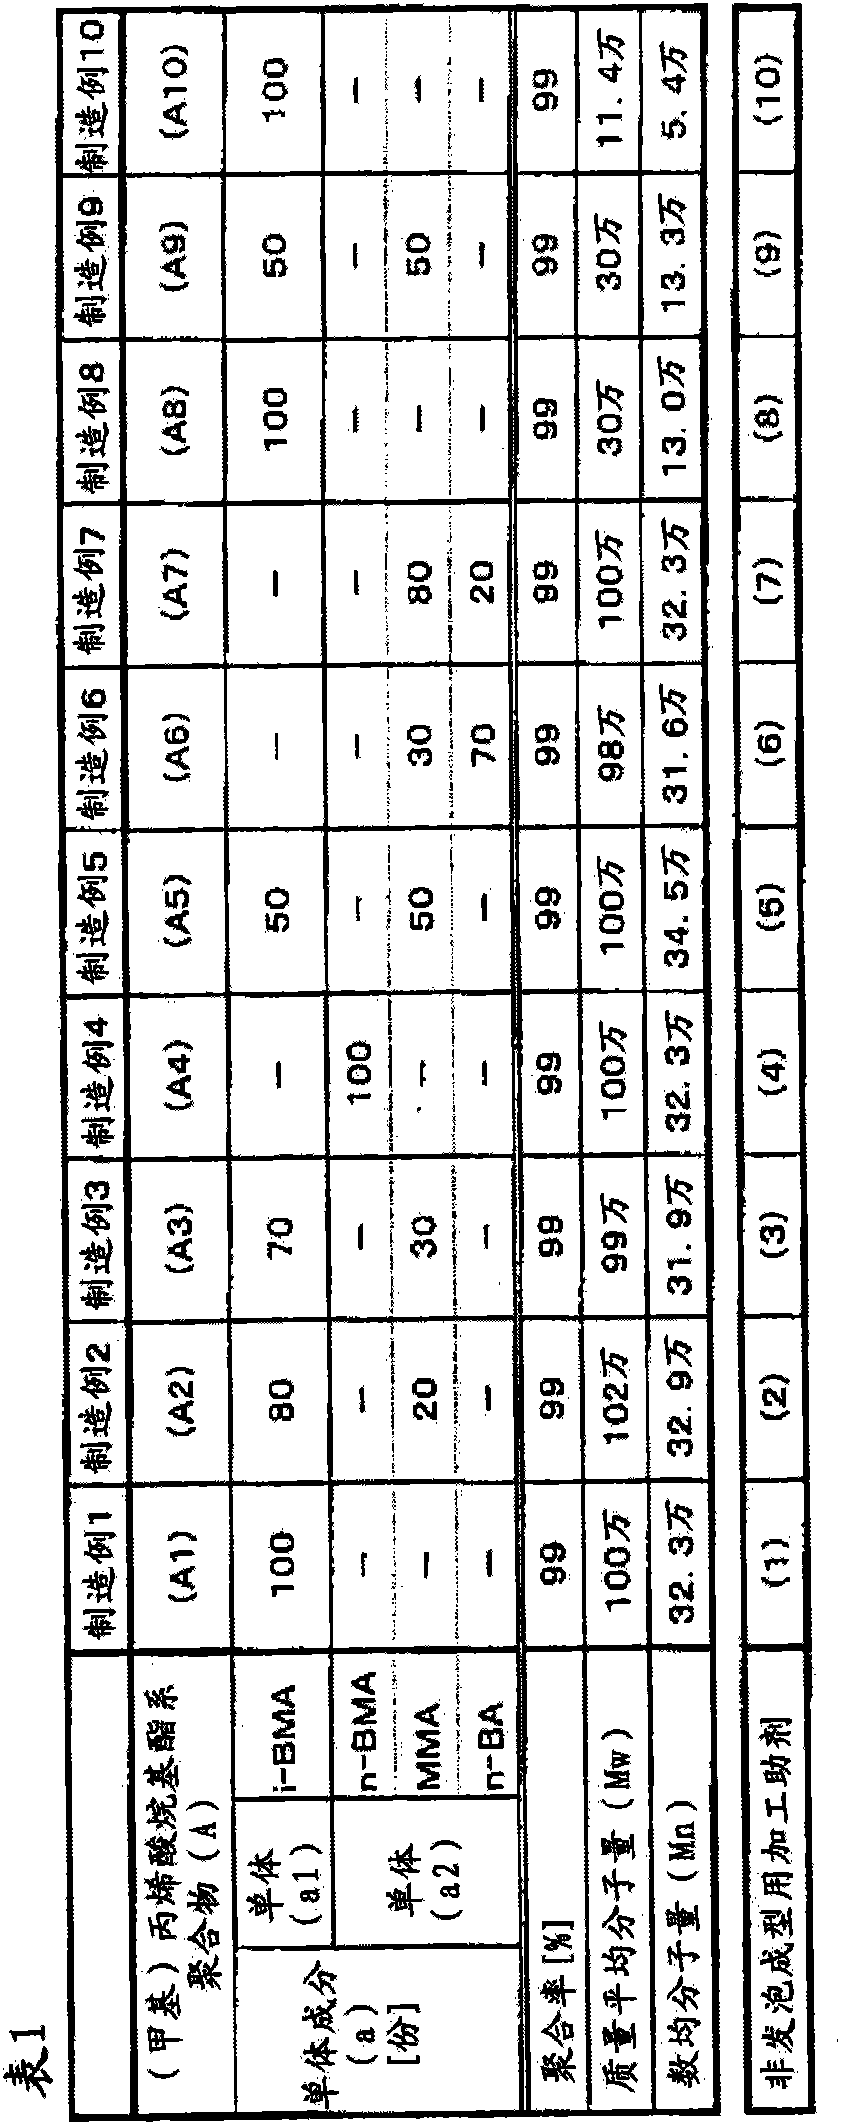 Non-foaming treatment auxiliary agent, resin composition, and molded article